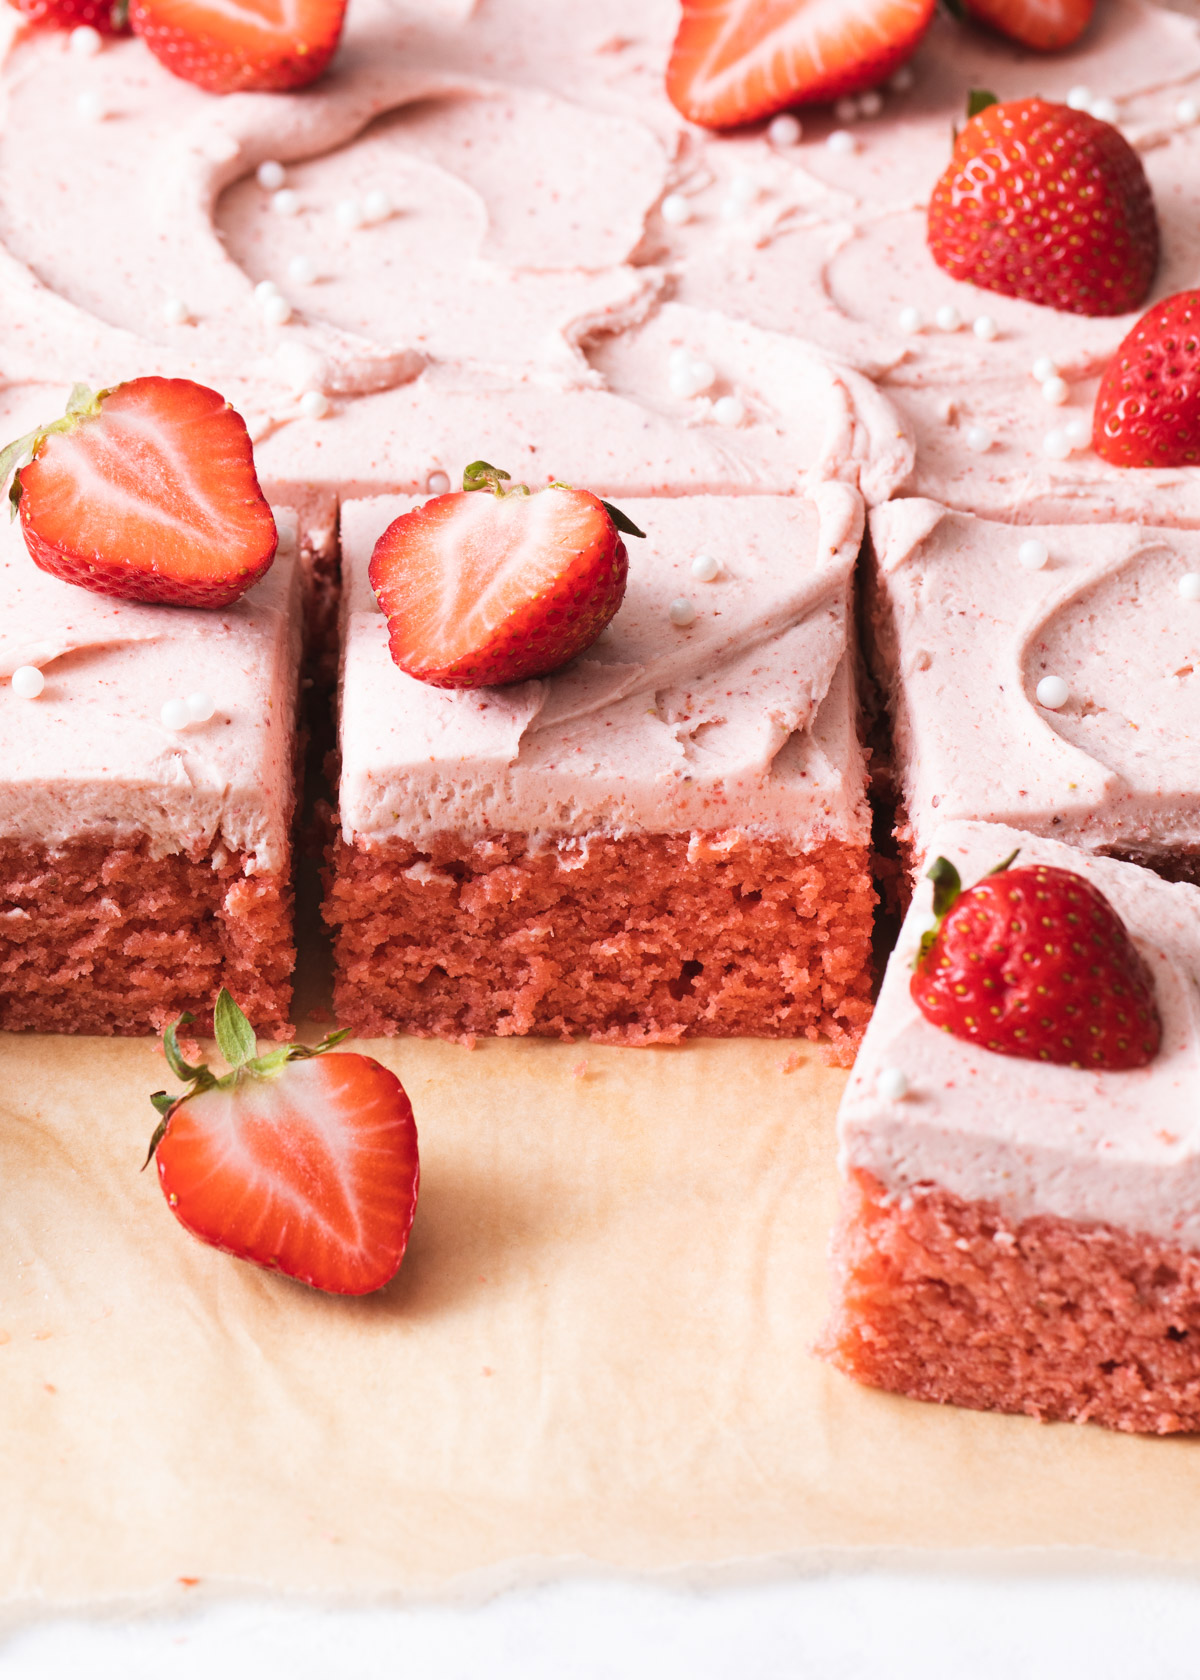 A close-up of slices of strawberry snack cake